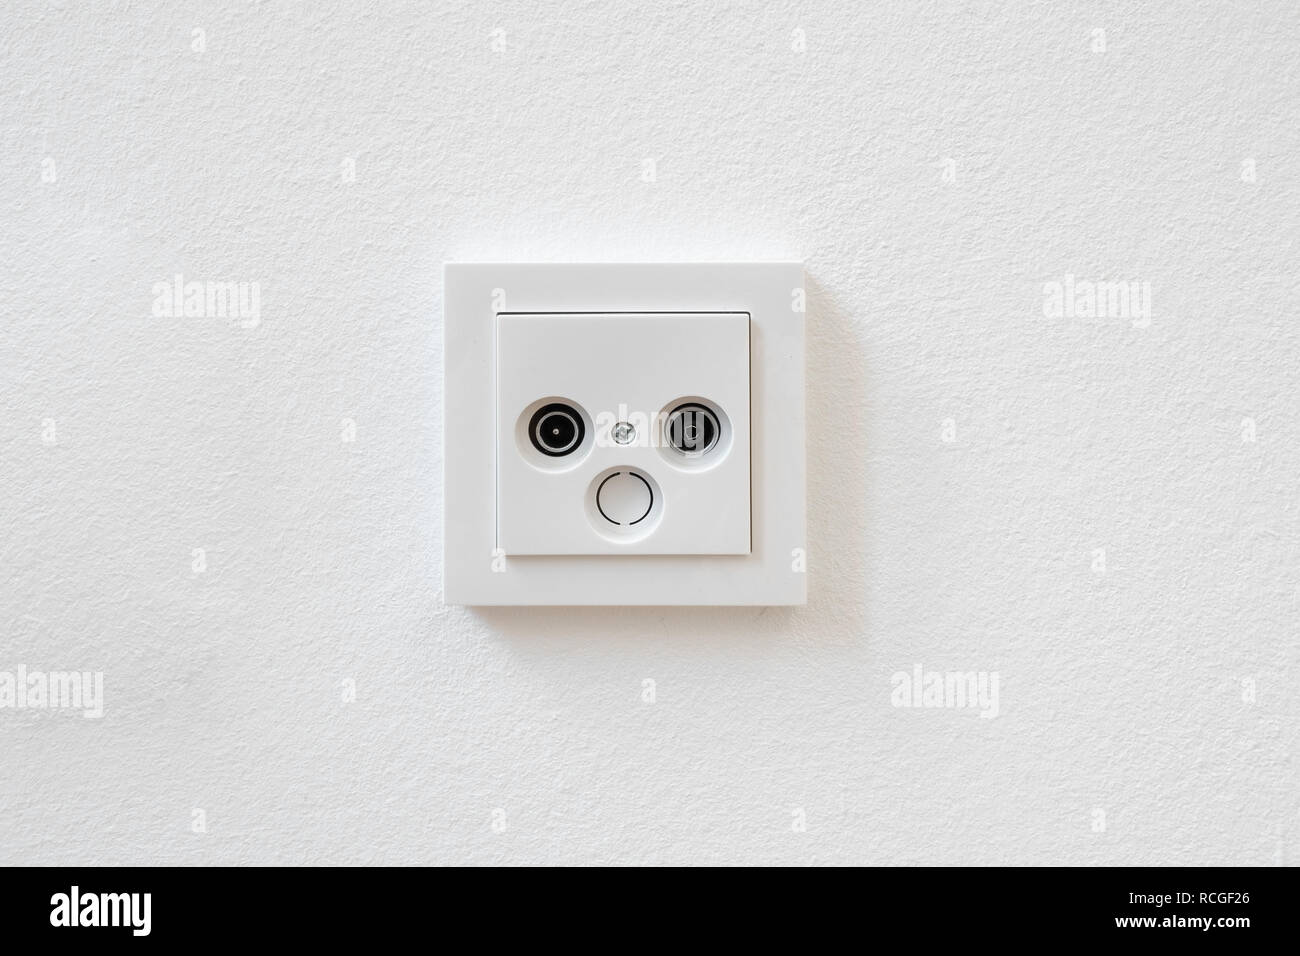 internet and tv outlet , cable tv box socket Stock Photo - Alamy